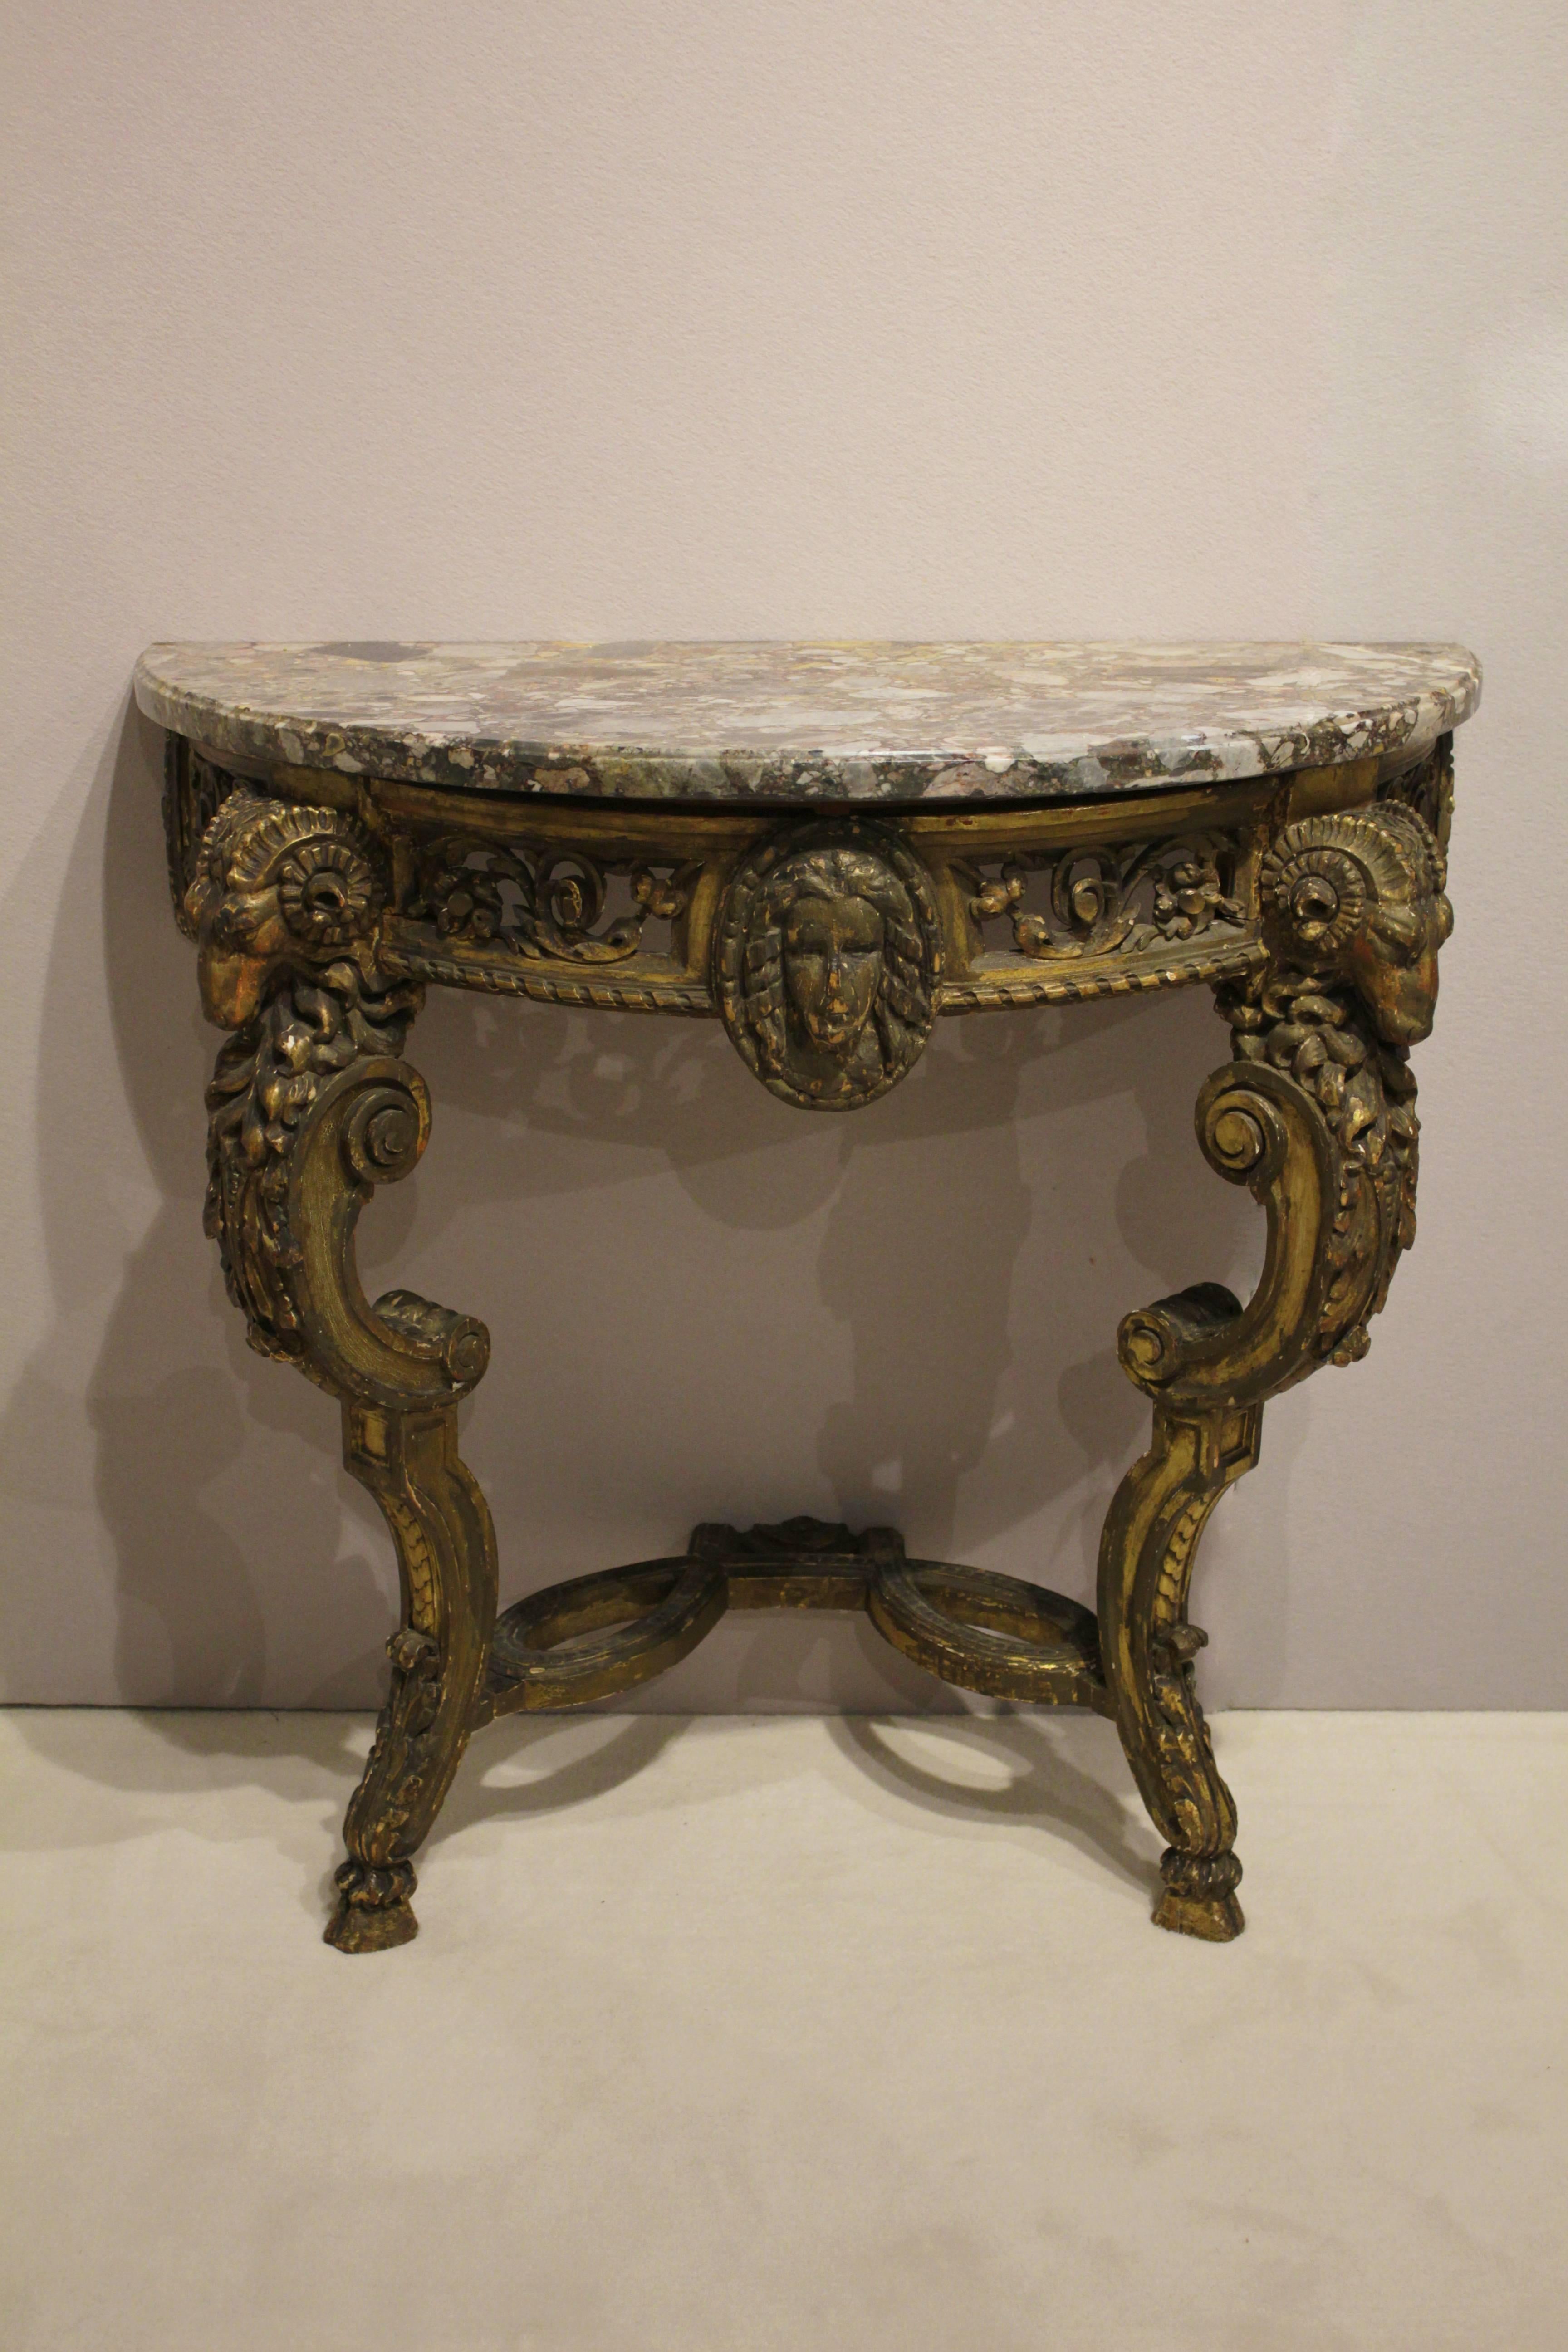 Pair of Italian carved giltwood console tables
demilune with marble top,
Italy, late 18th century.
Measures: H 32in., W 32.25 in.